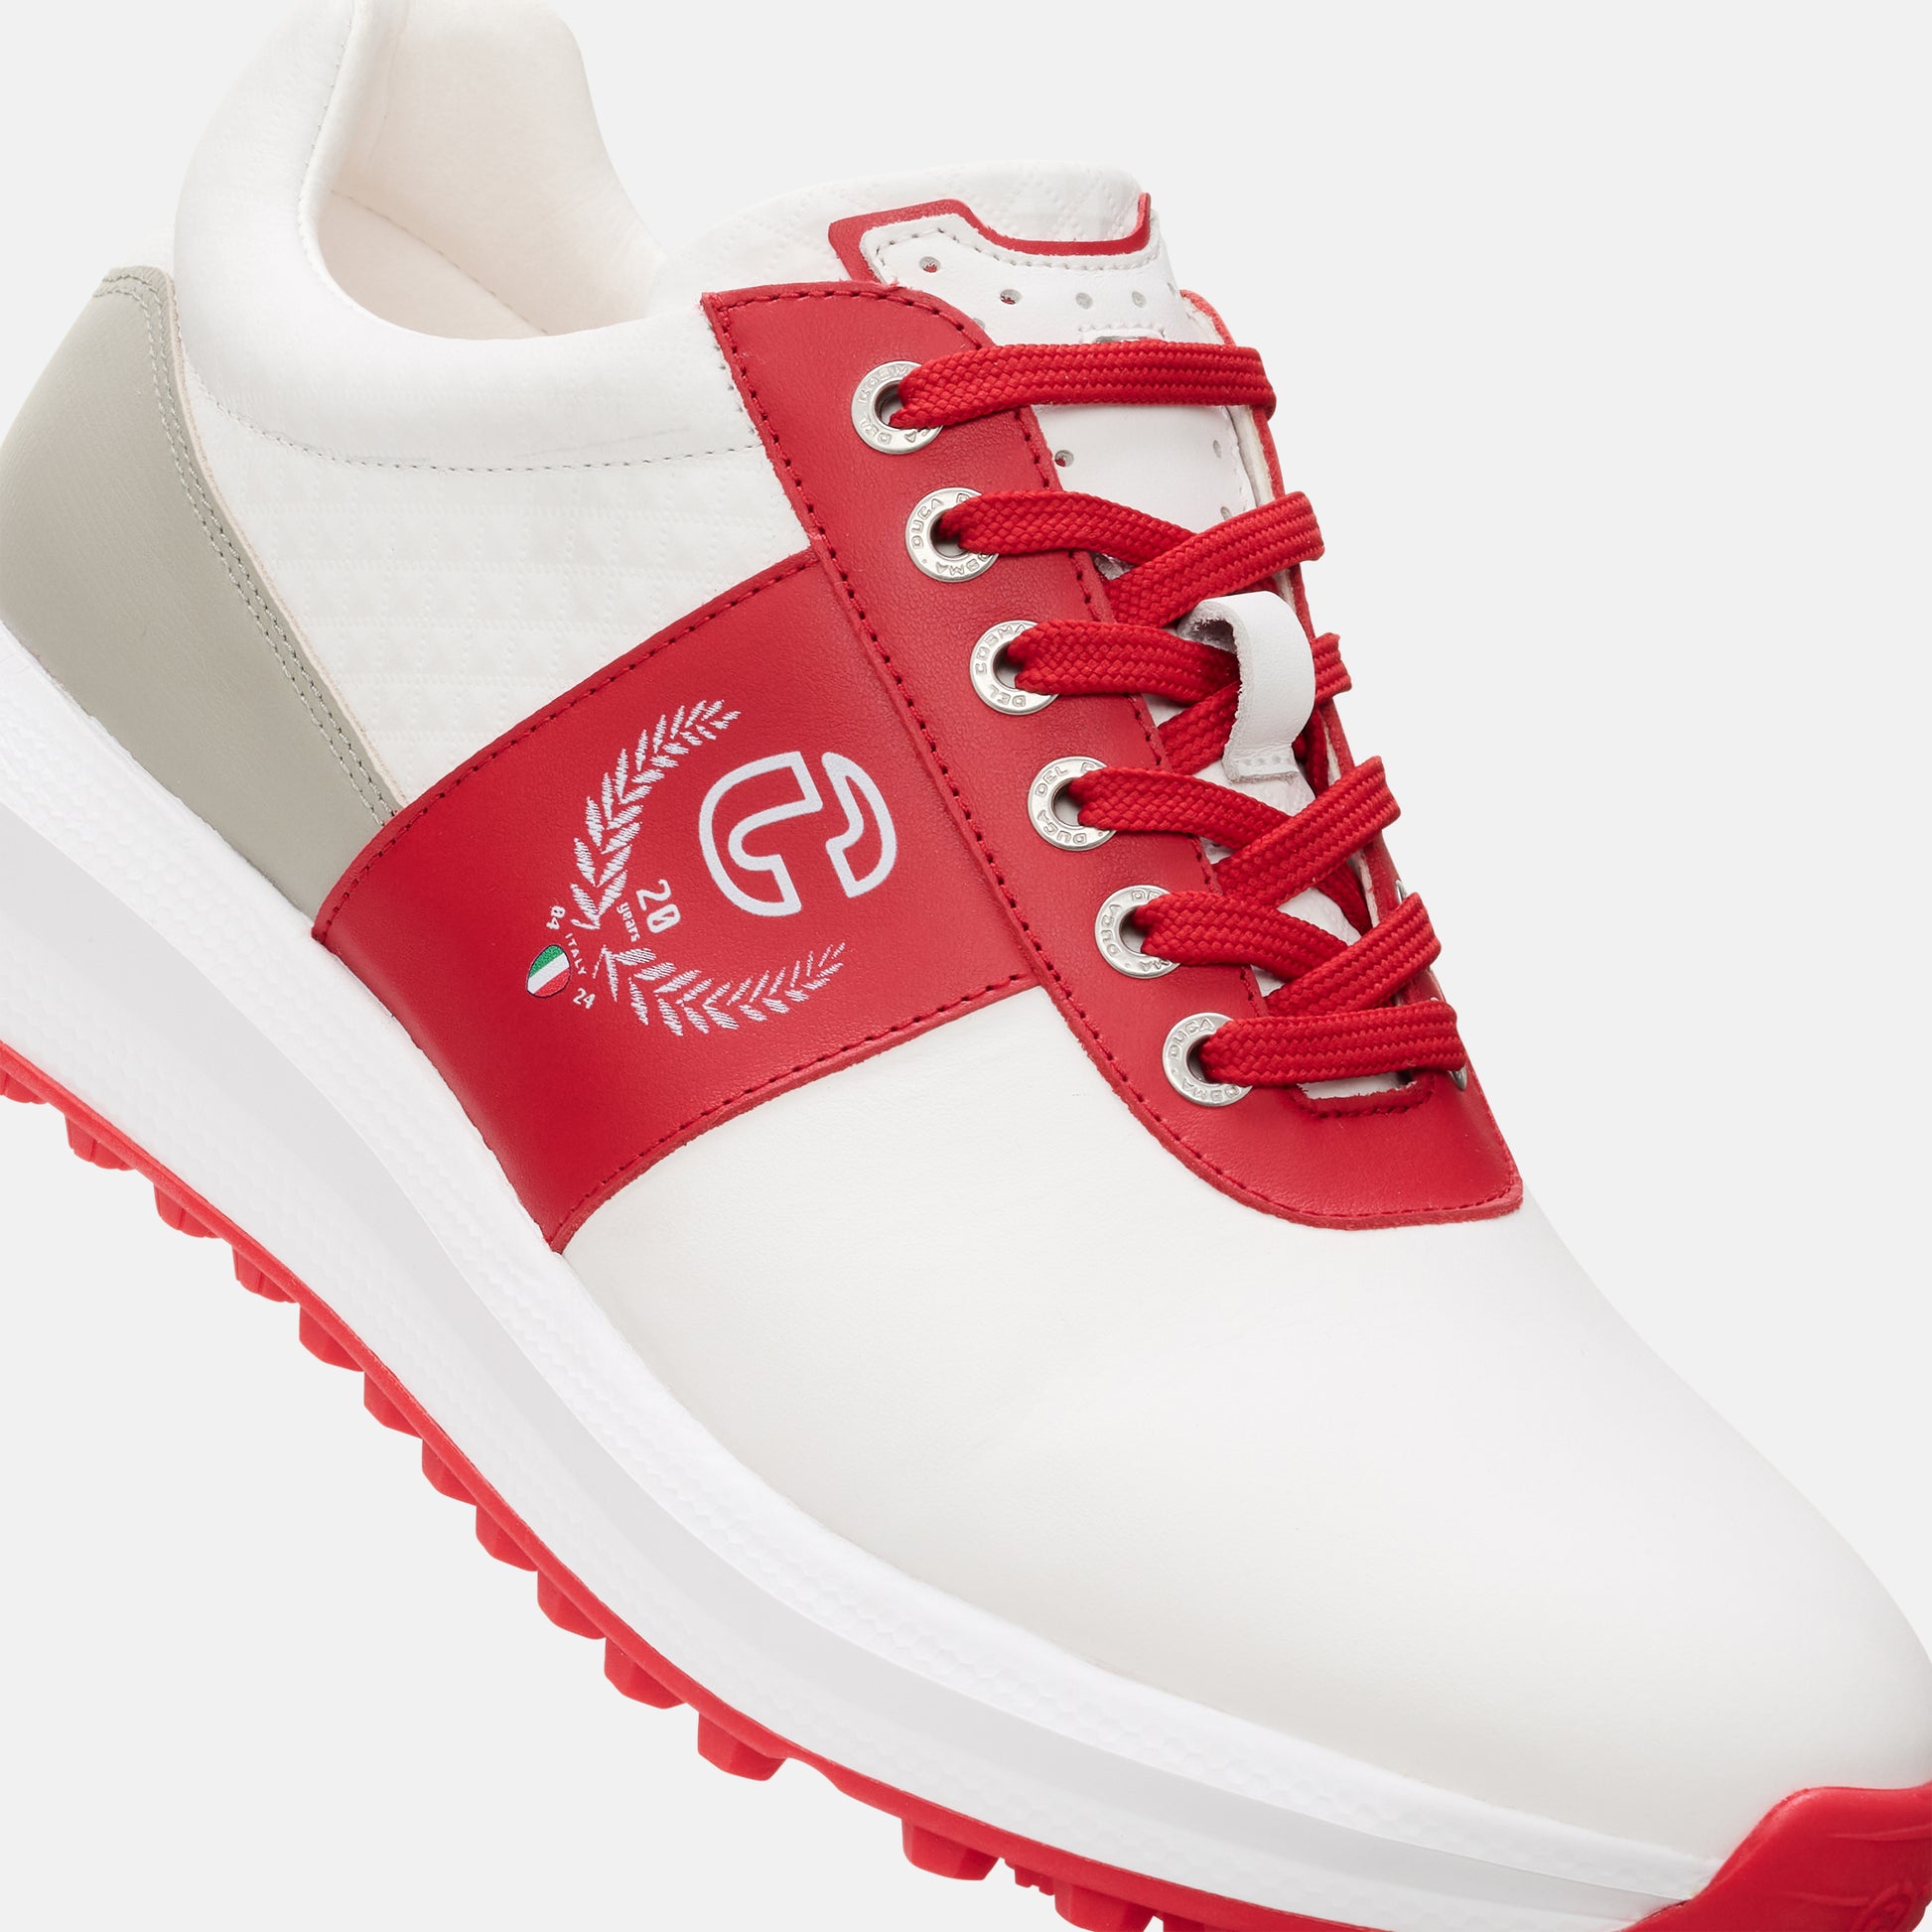 White Golf Shoes, Men's Red Golf Shoes, Men's Golf Shoes Duca del Cosma, Spikeless Golf Shoes, Waterproof Golf Shoes.